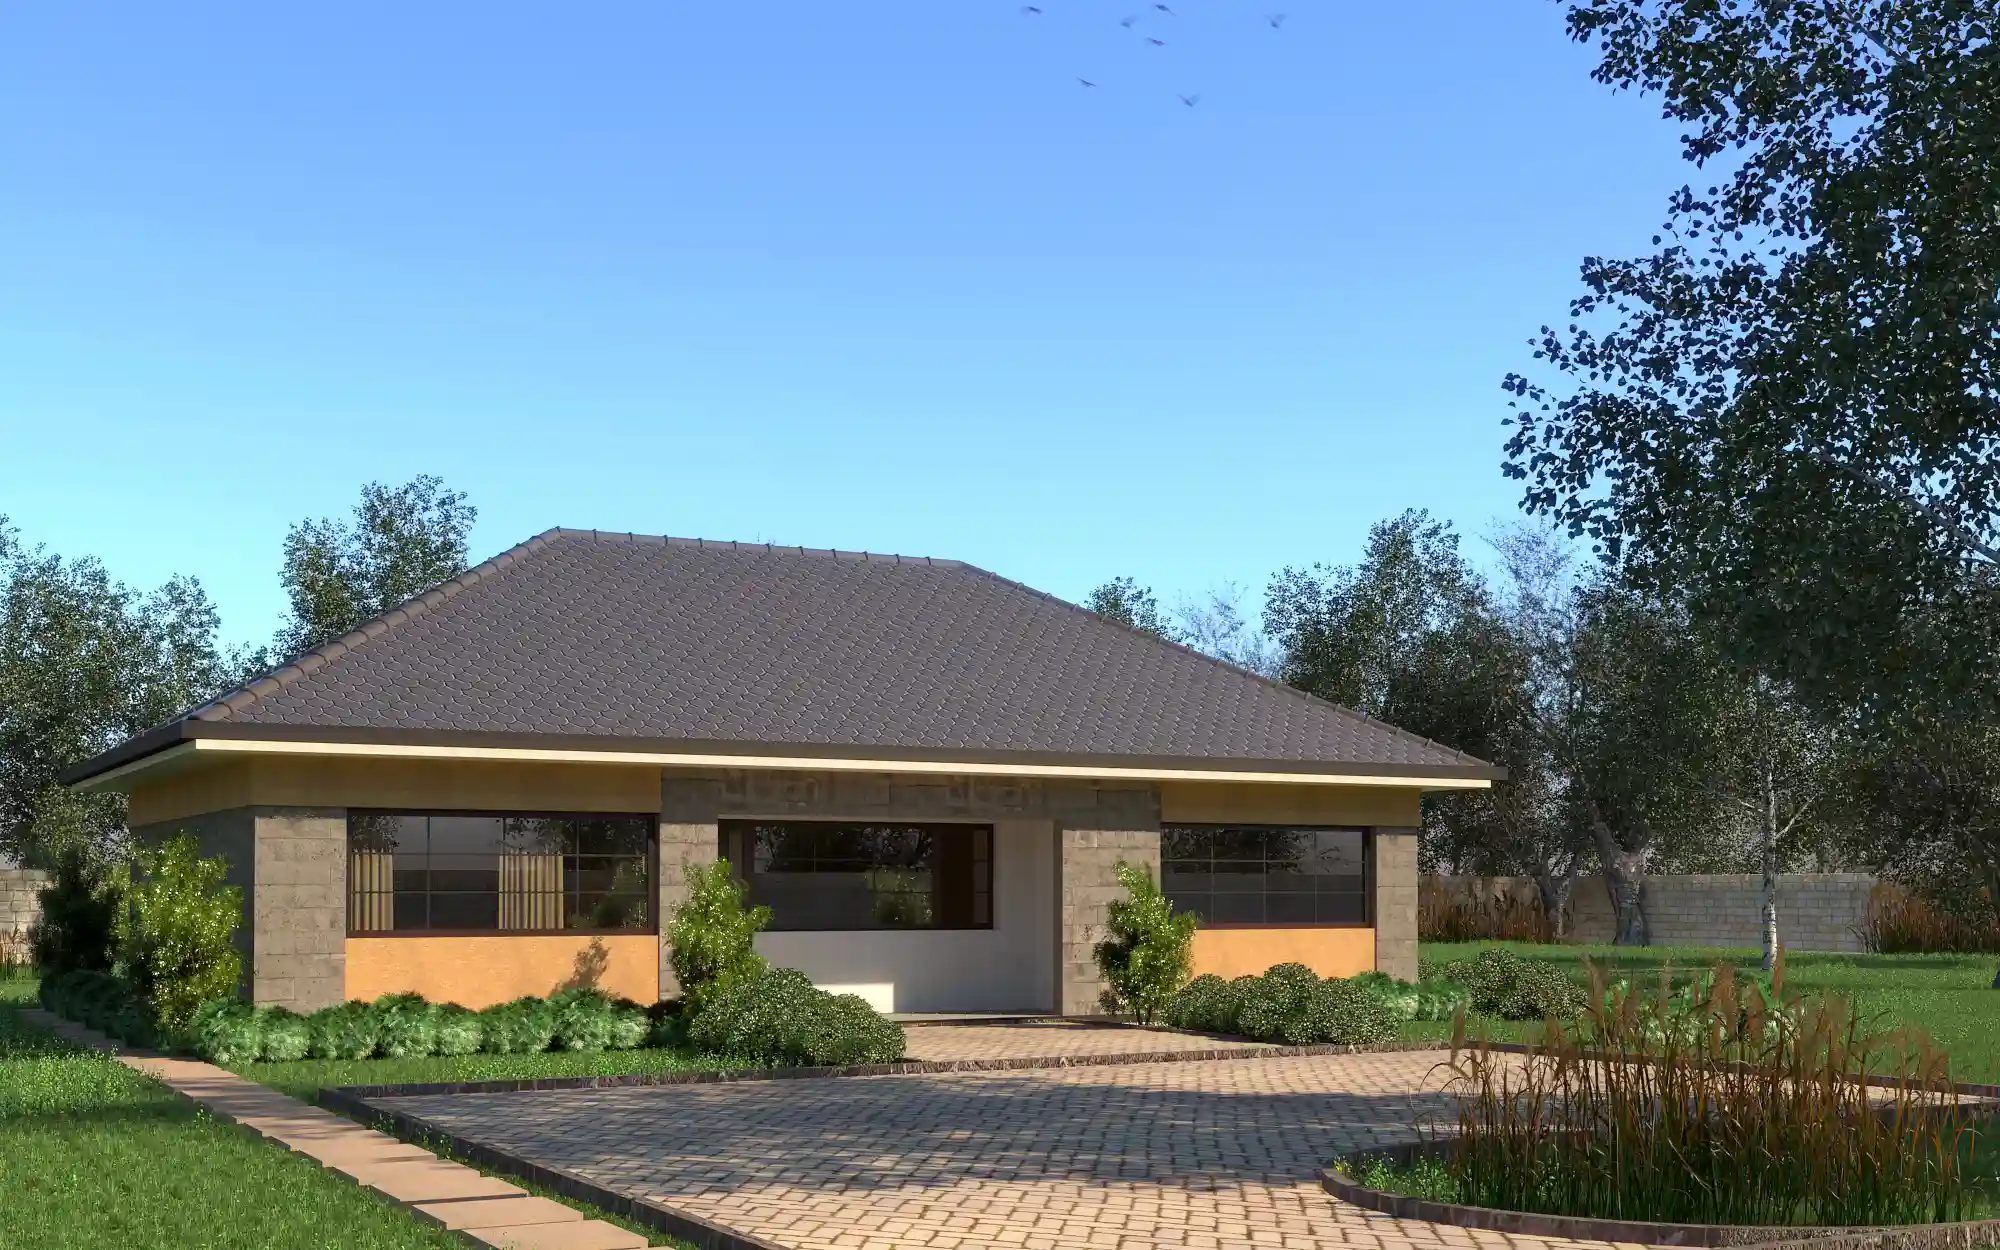 3 Bedroom Bungalow - ID 31101 - Phase 3 - Front from Inuua Tujenge house plans with 3 bedrooms and 2 bathrooms. ( jengapolepole )